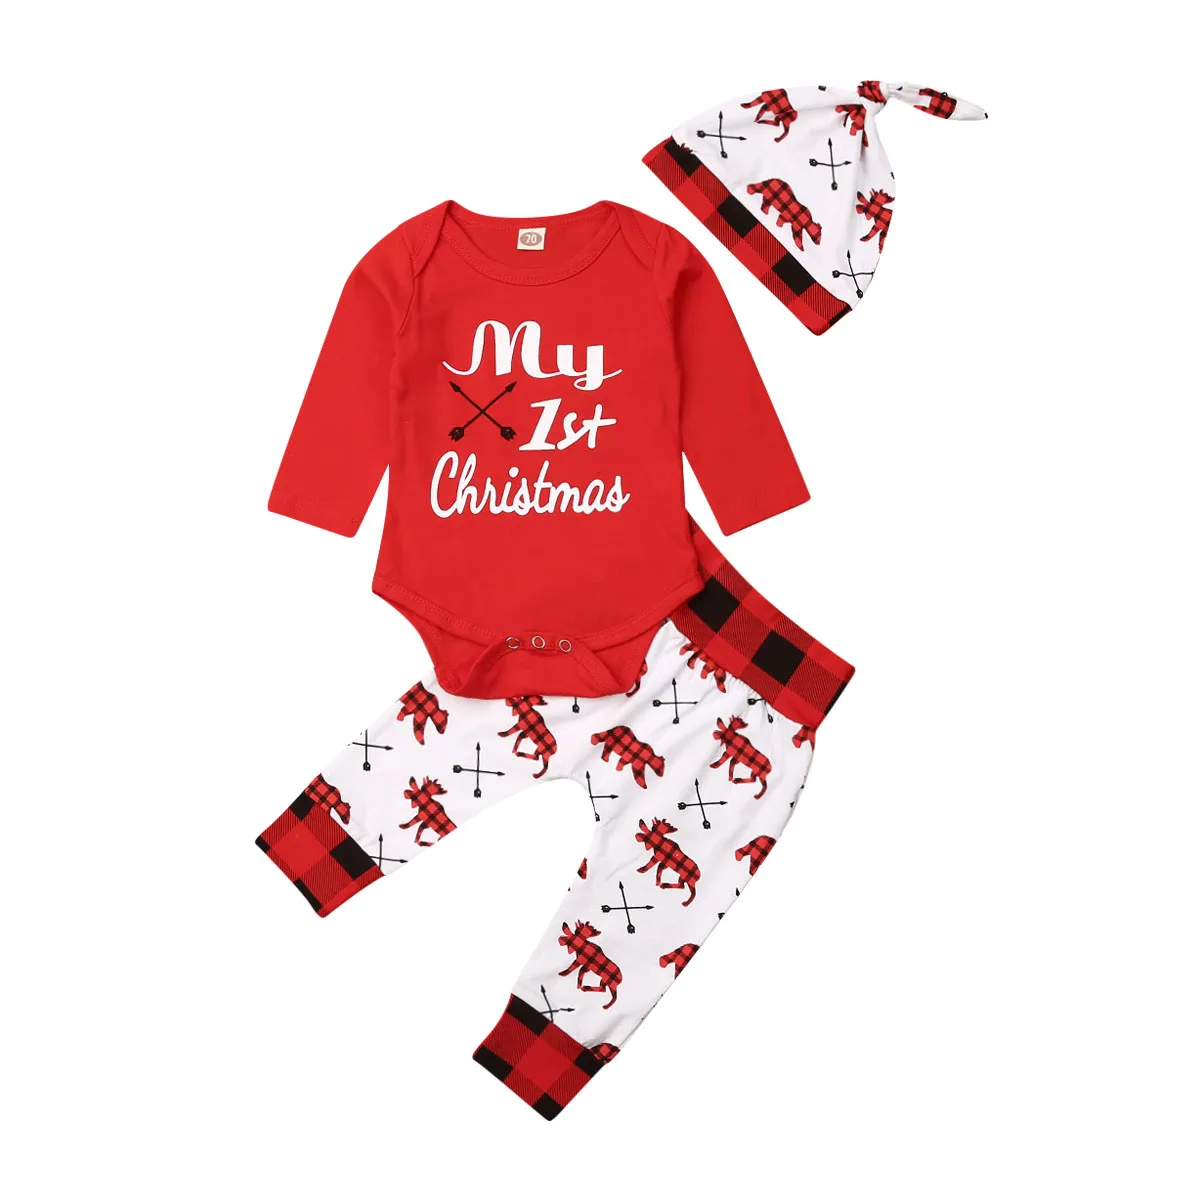 3pcs Cotton Baby Outfit Clothes Cute Christmas Newborn Sets Toddler First Xmas Cartoon Printed Romper Trousers Hat Baby's Set - Цвет: Красный